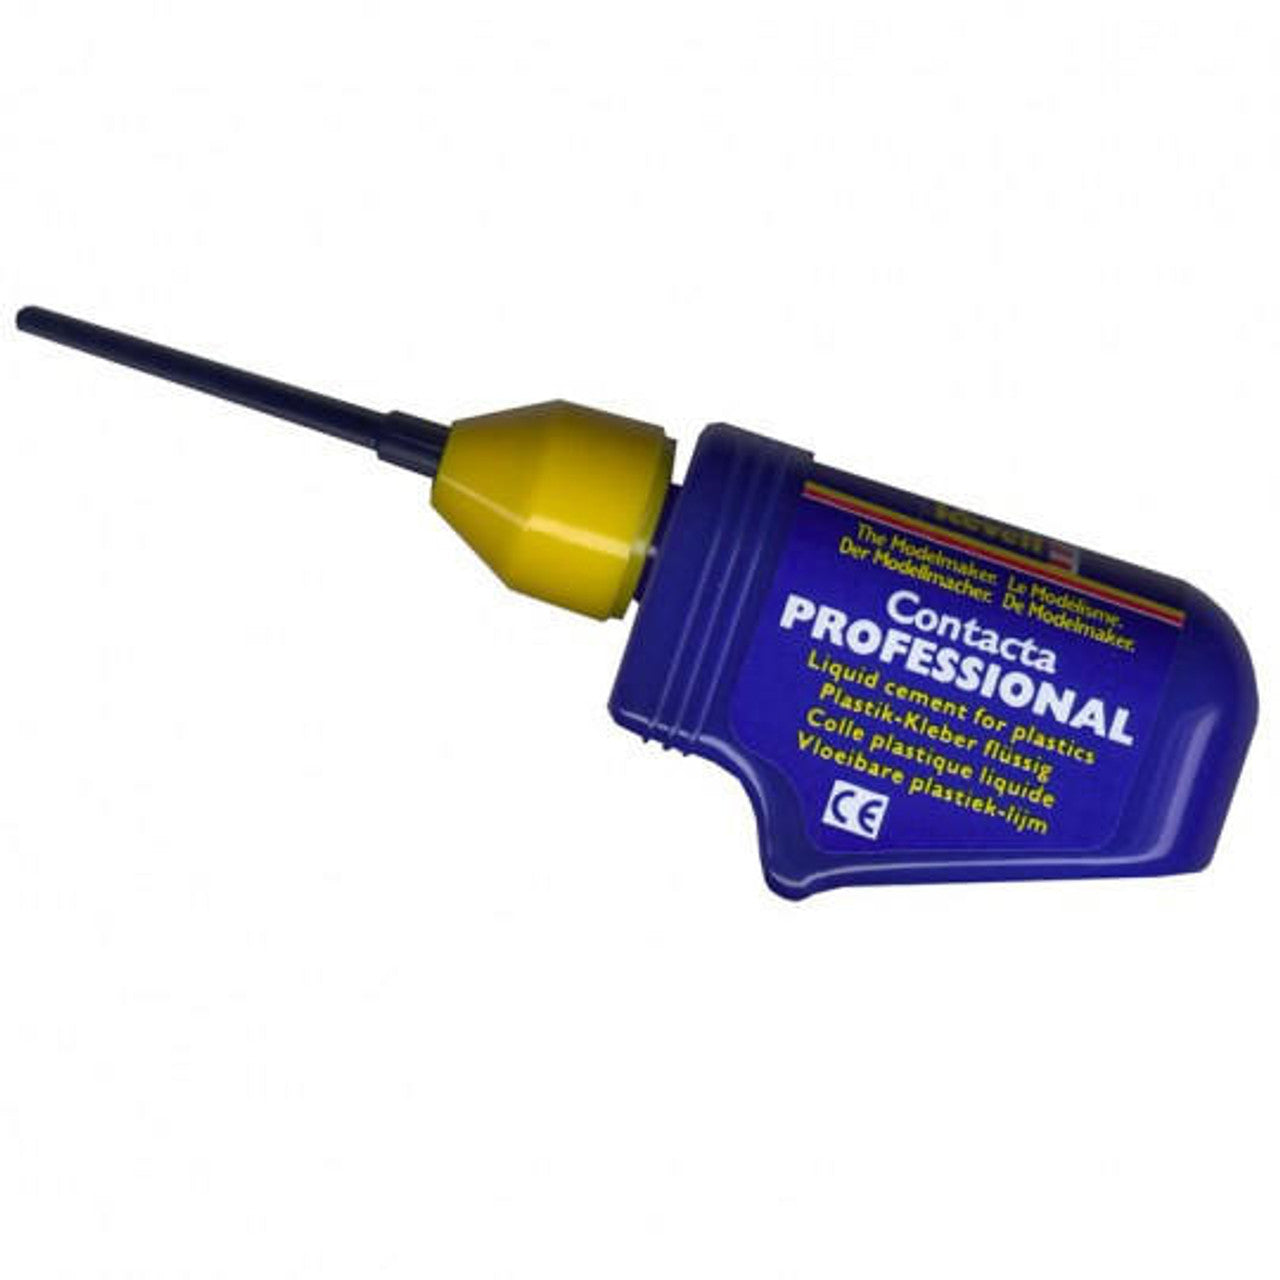 Revell Glues - Contacta Professional 25g Needle - Loaded Dice Barry Vale of Glamorgan CF64 3HD